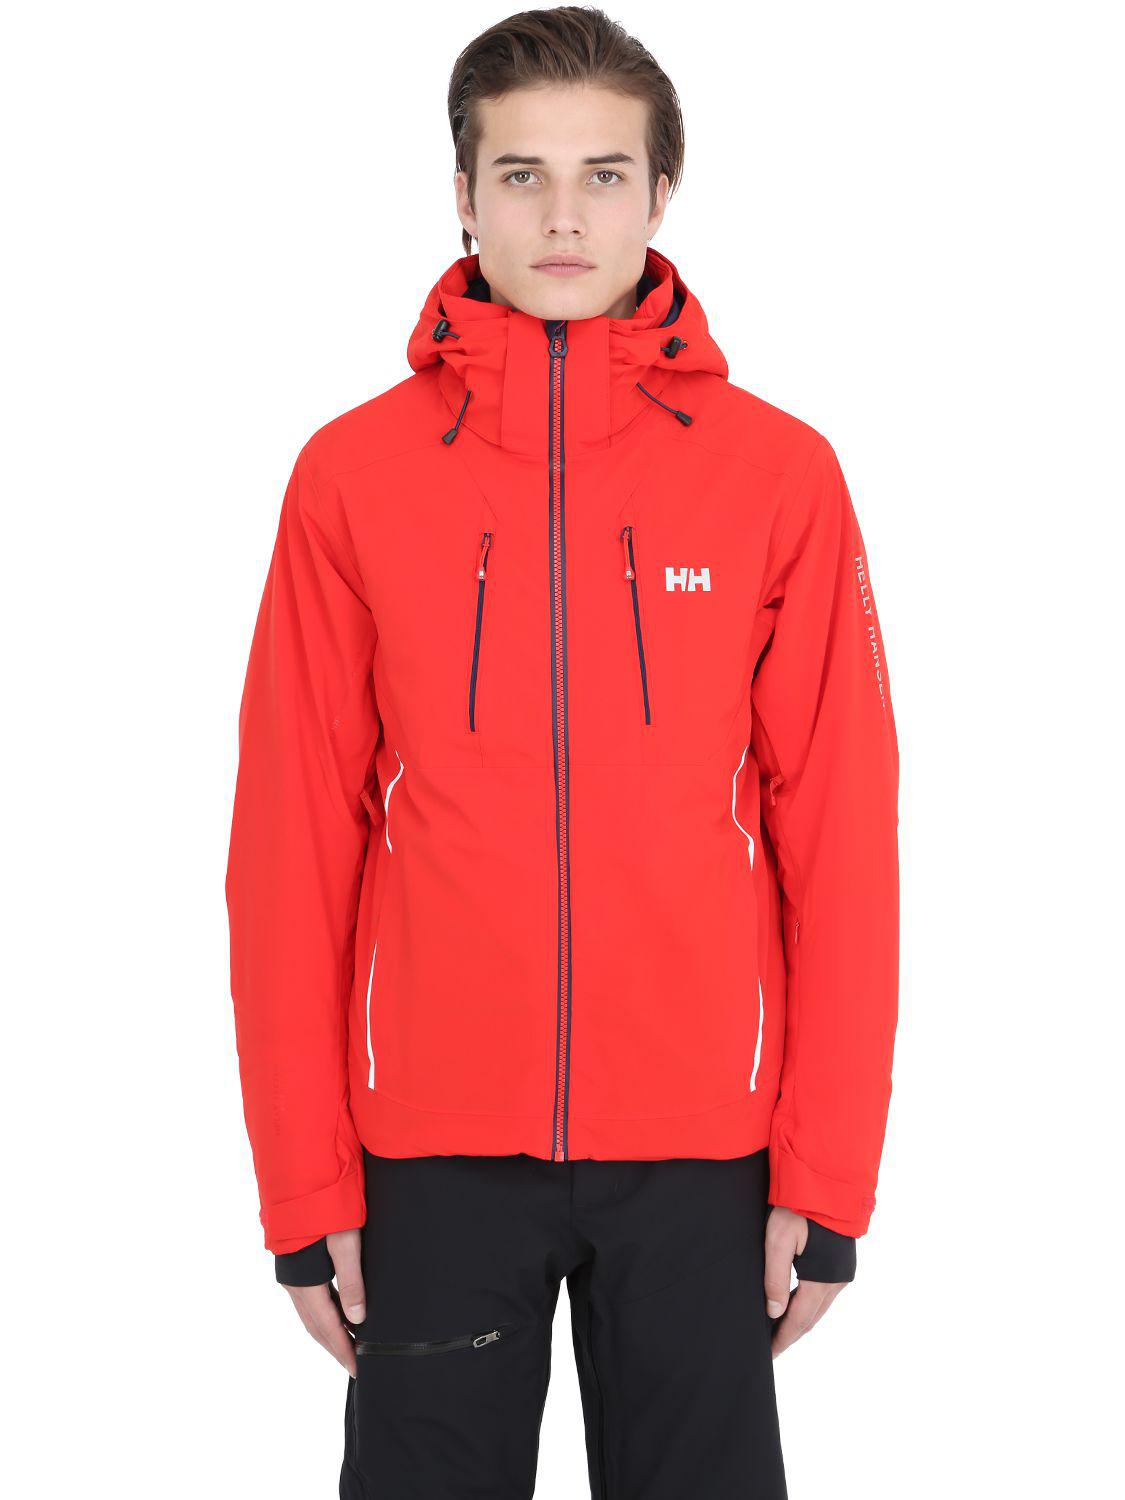 helly hansen icon 3.0 insulated jacket,Quality assurance,protein-burger.com